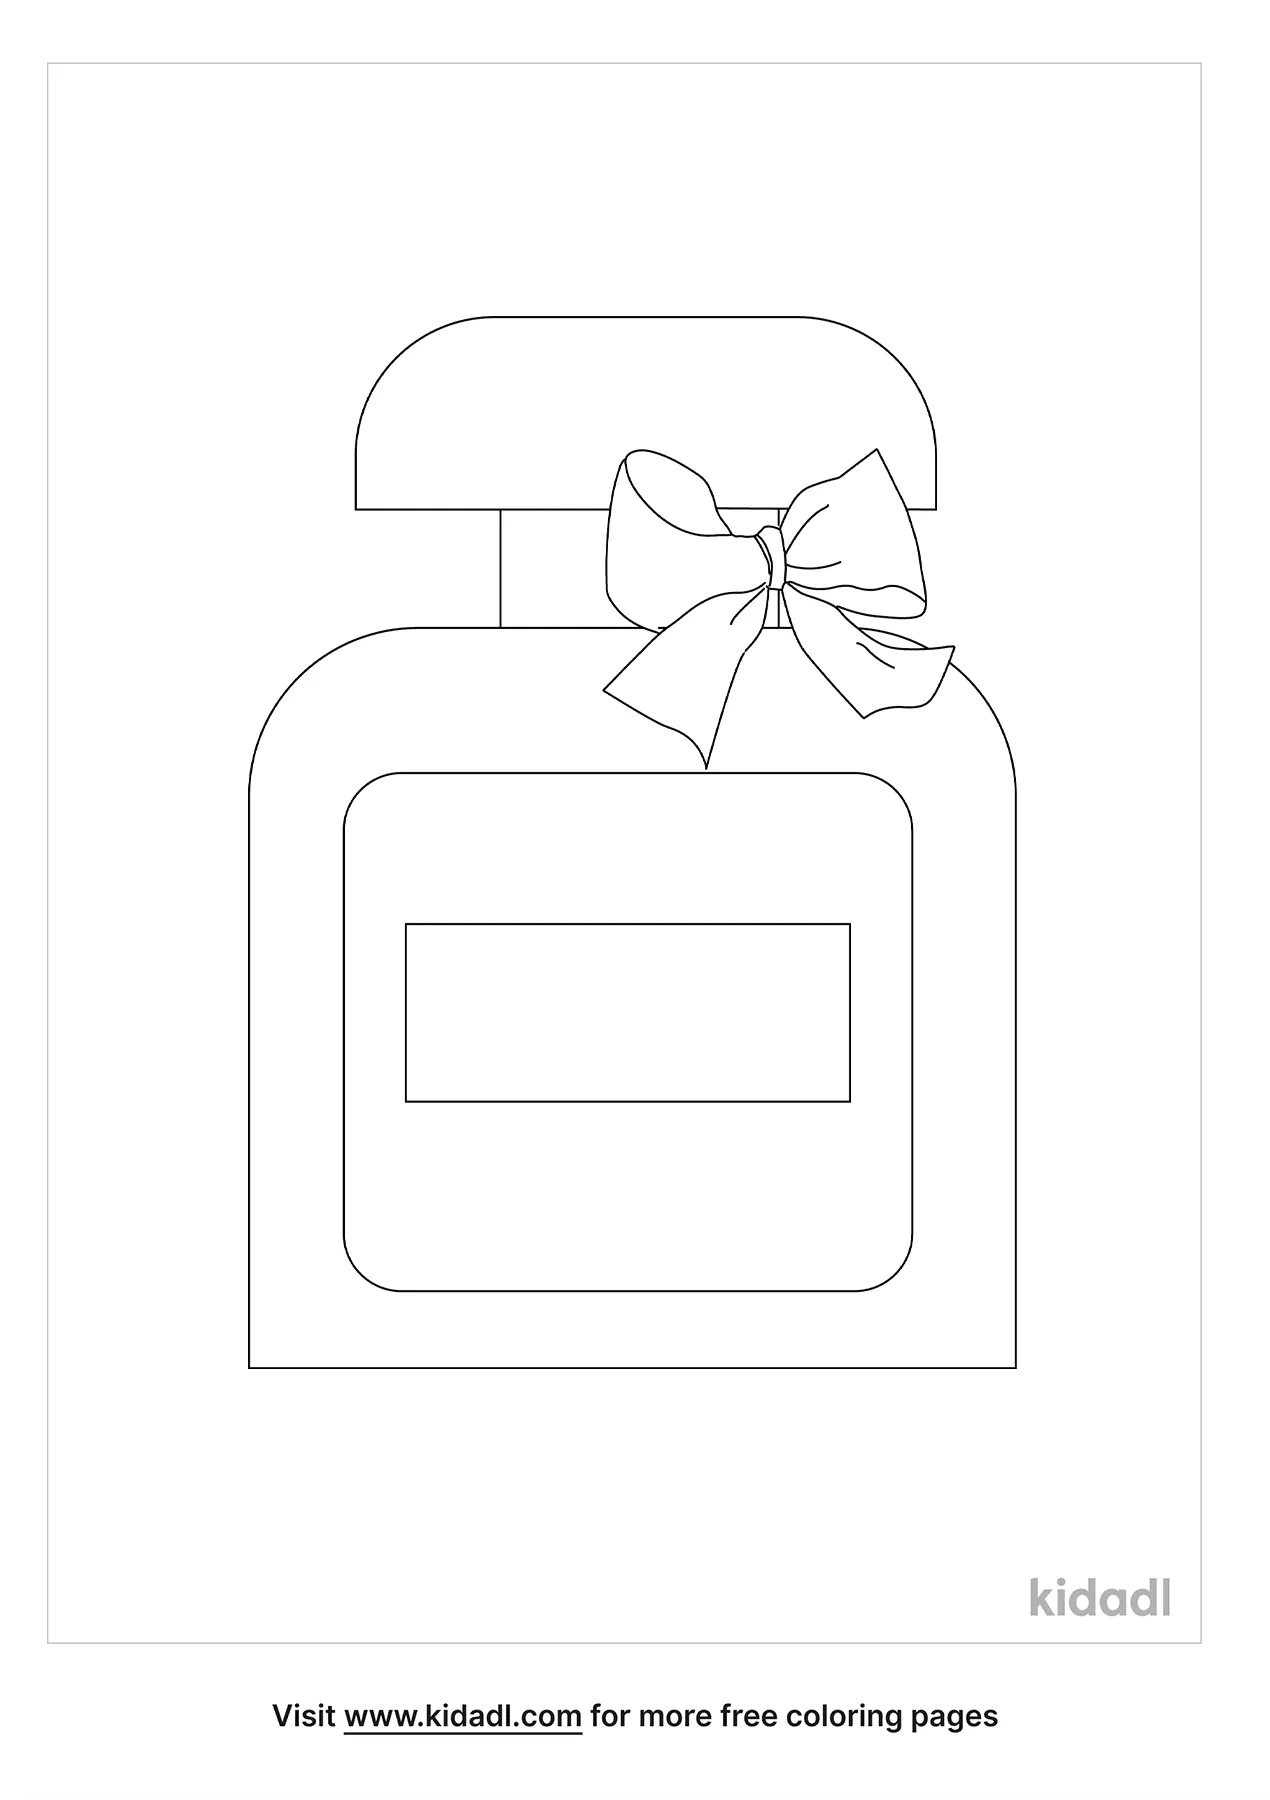 Flask Of Perfume Coloring Page